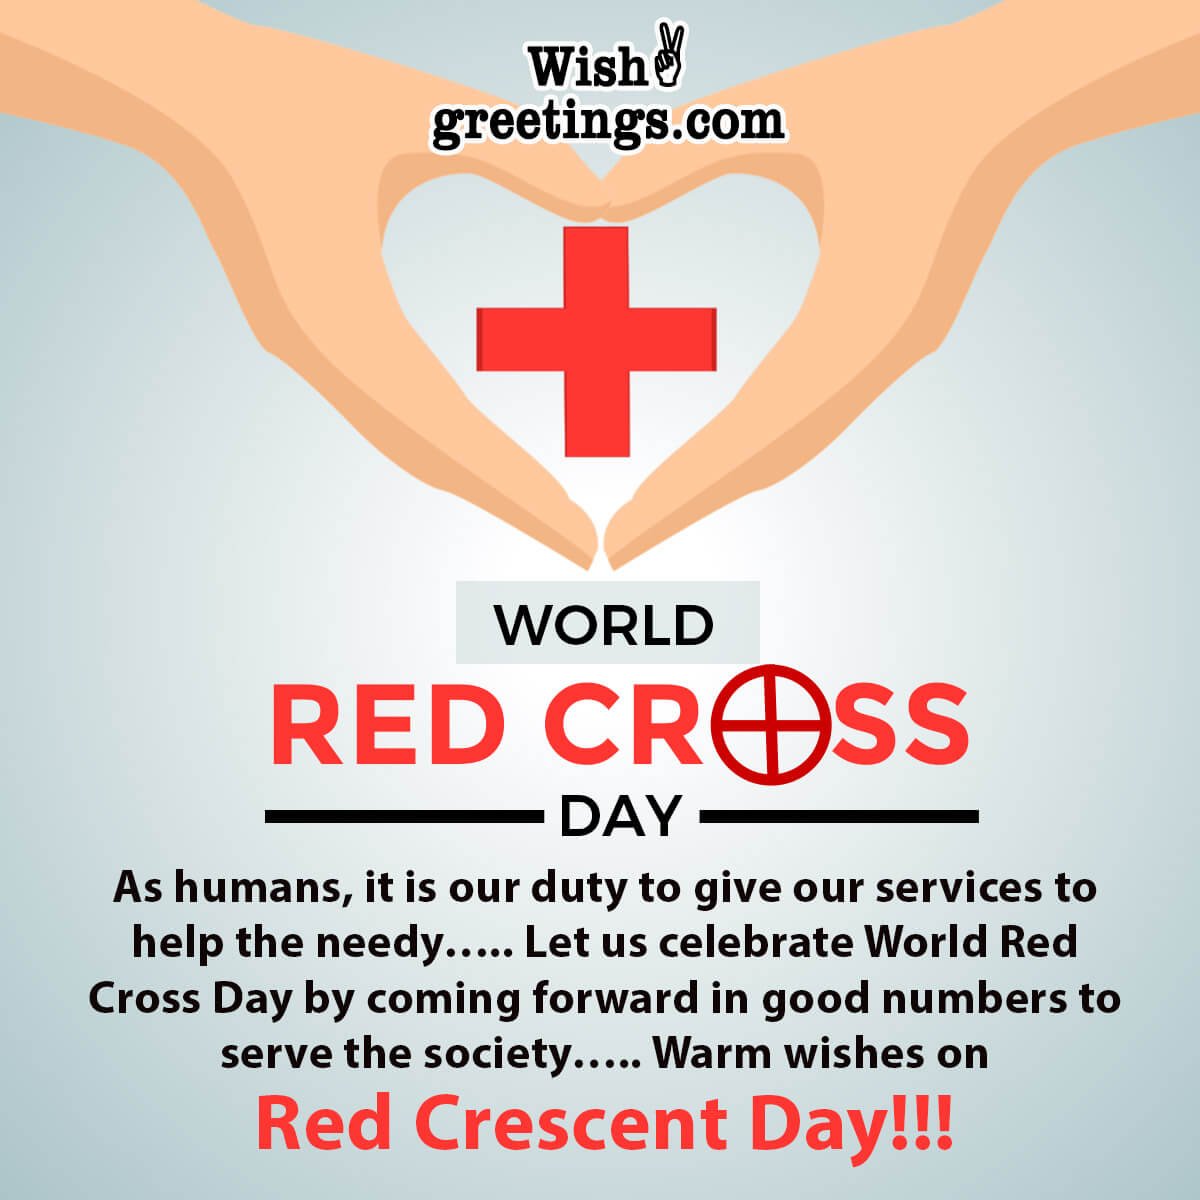 World Red Cross Day Wishes